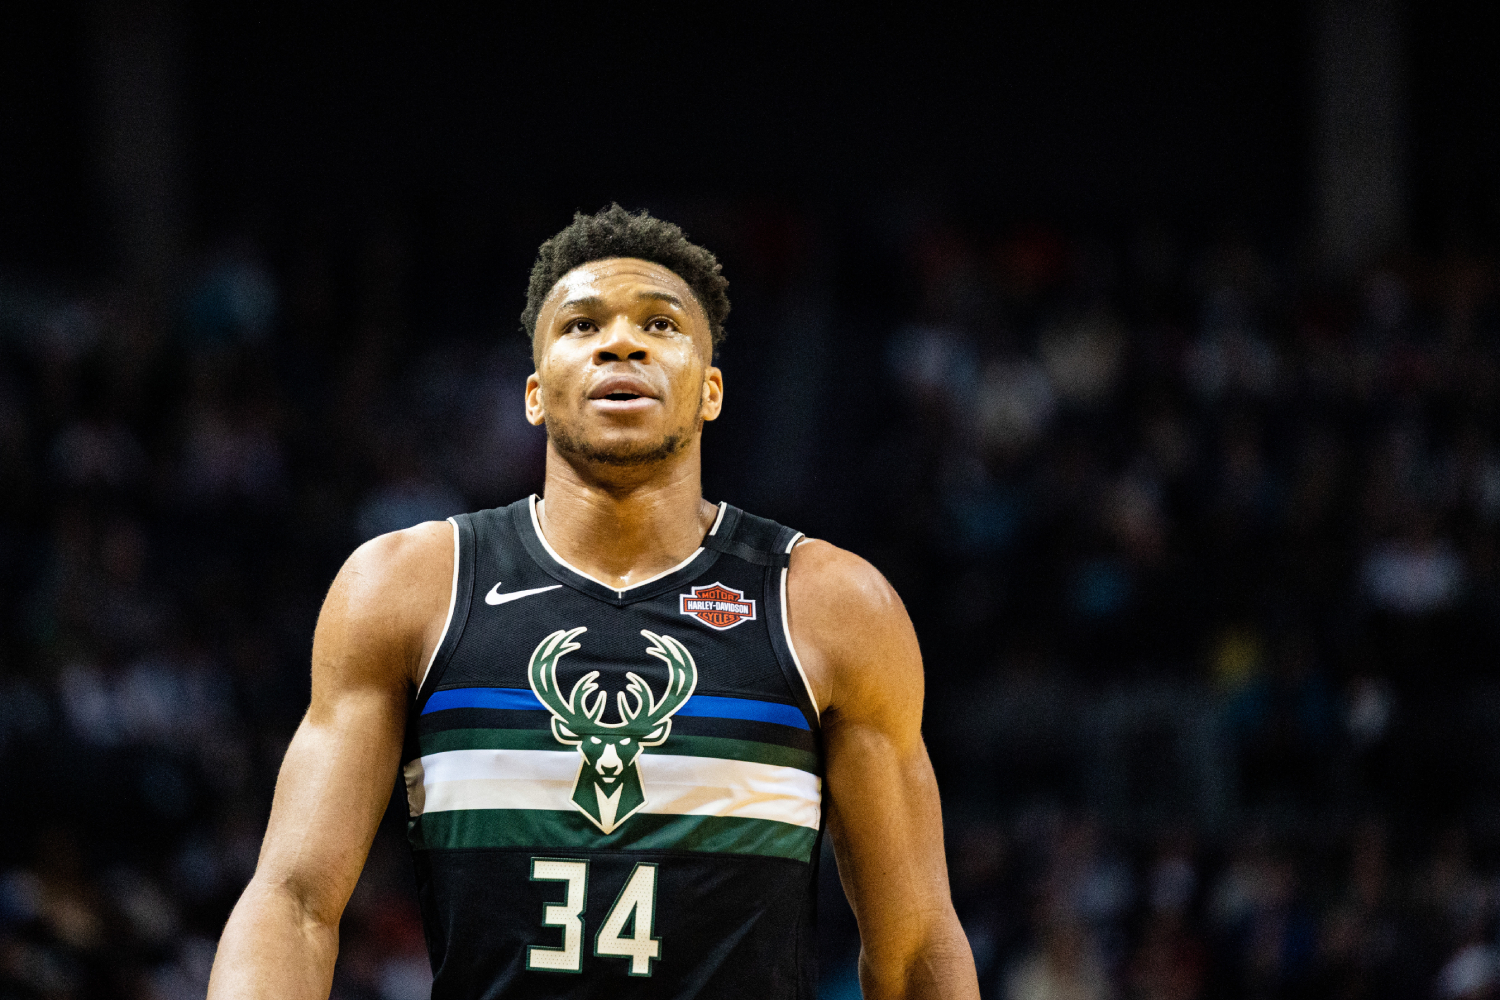 Giannis Antetokounmpo's future with the Milwaukee Bucks is up in the air. However, he just gave them a strong ultimatum.